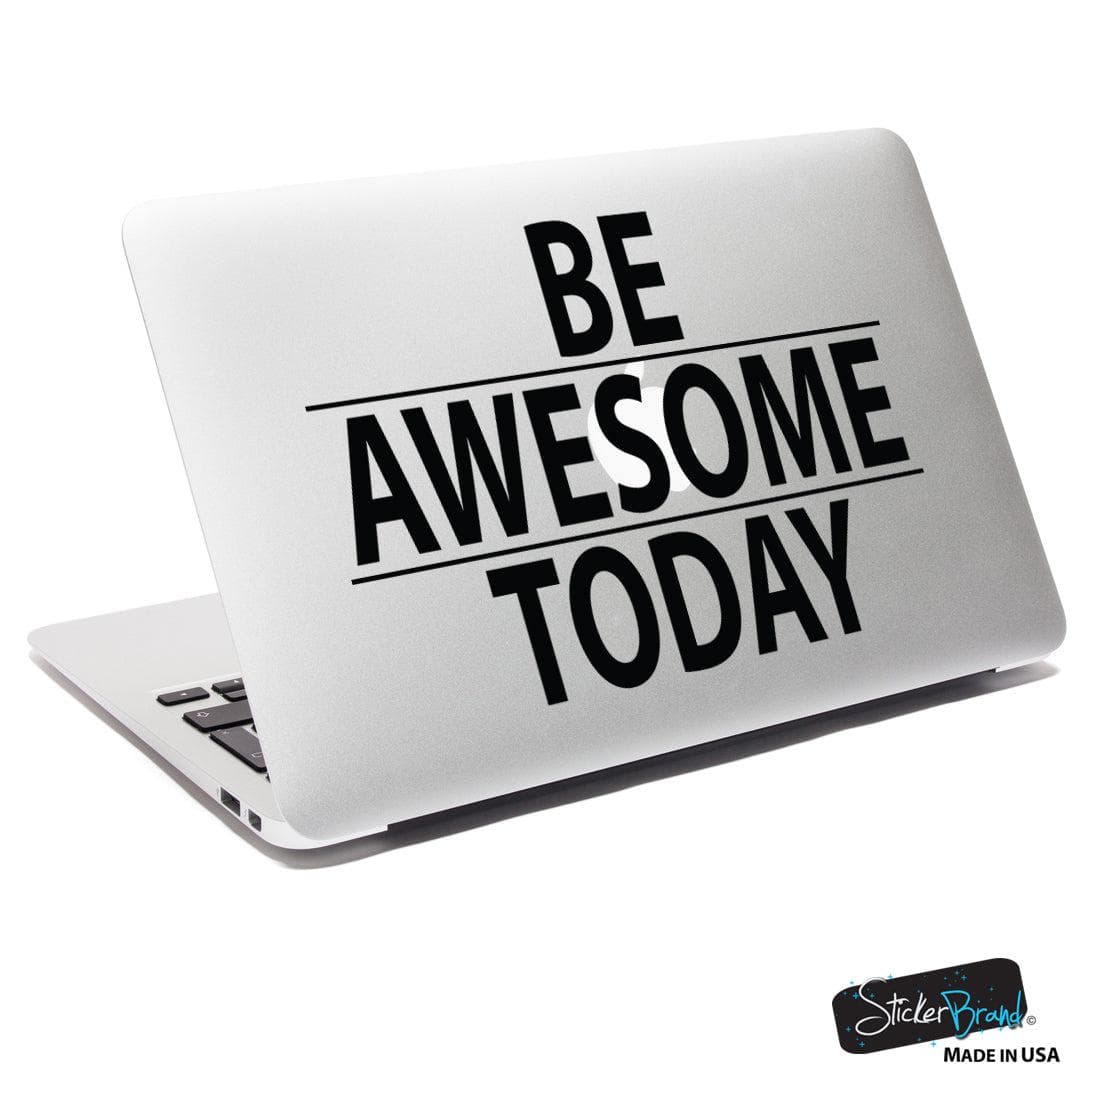 A black text decal saying "BE AWESOME TODAY" on a MacBook.